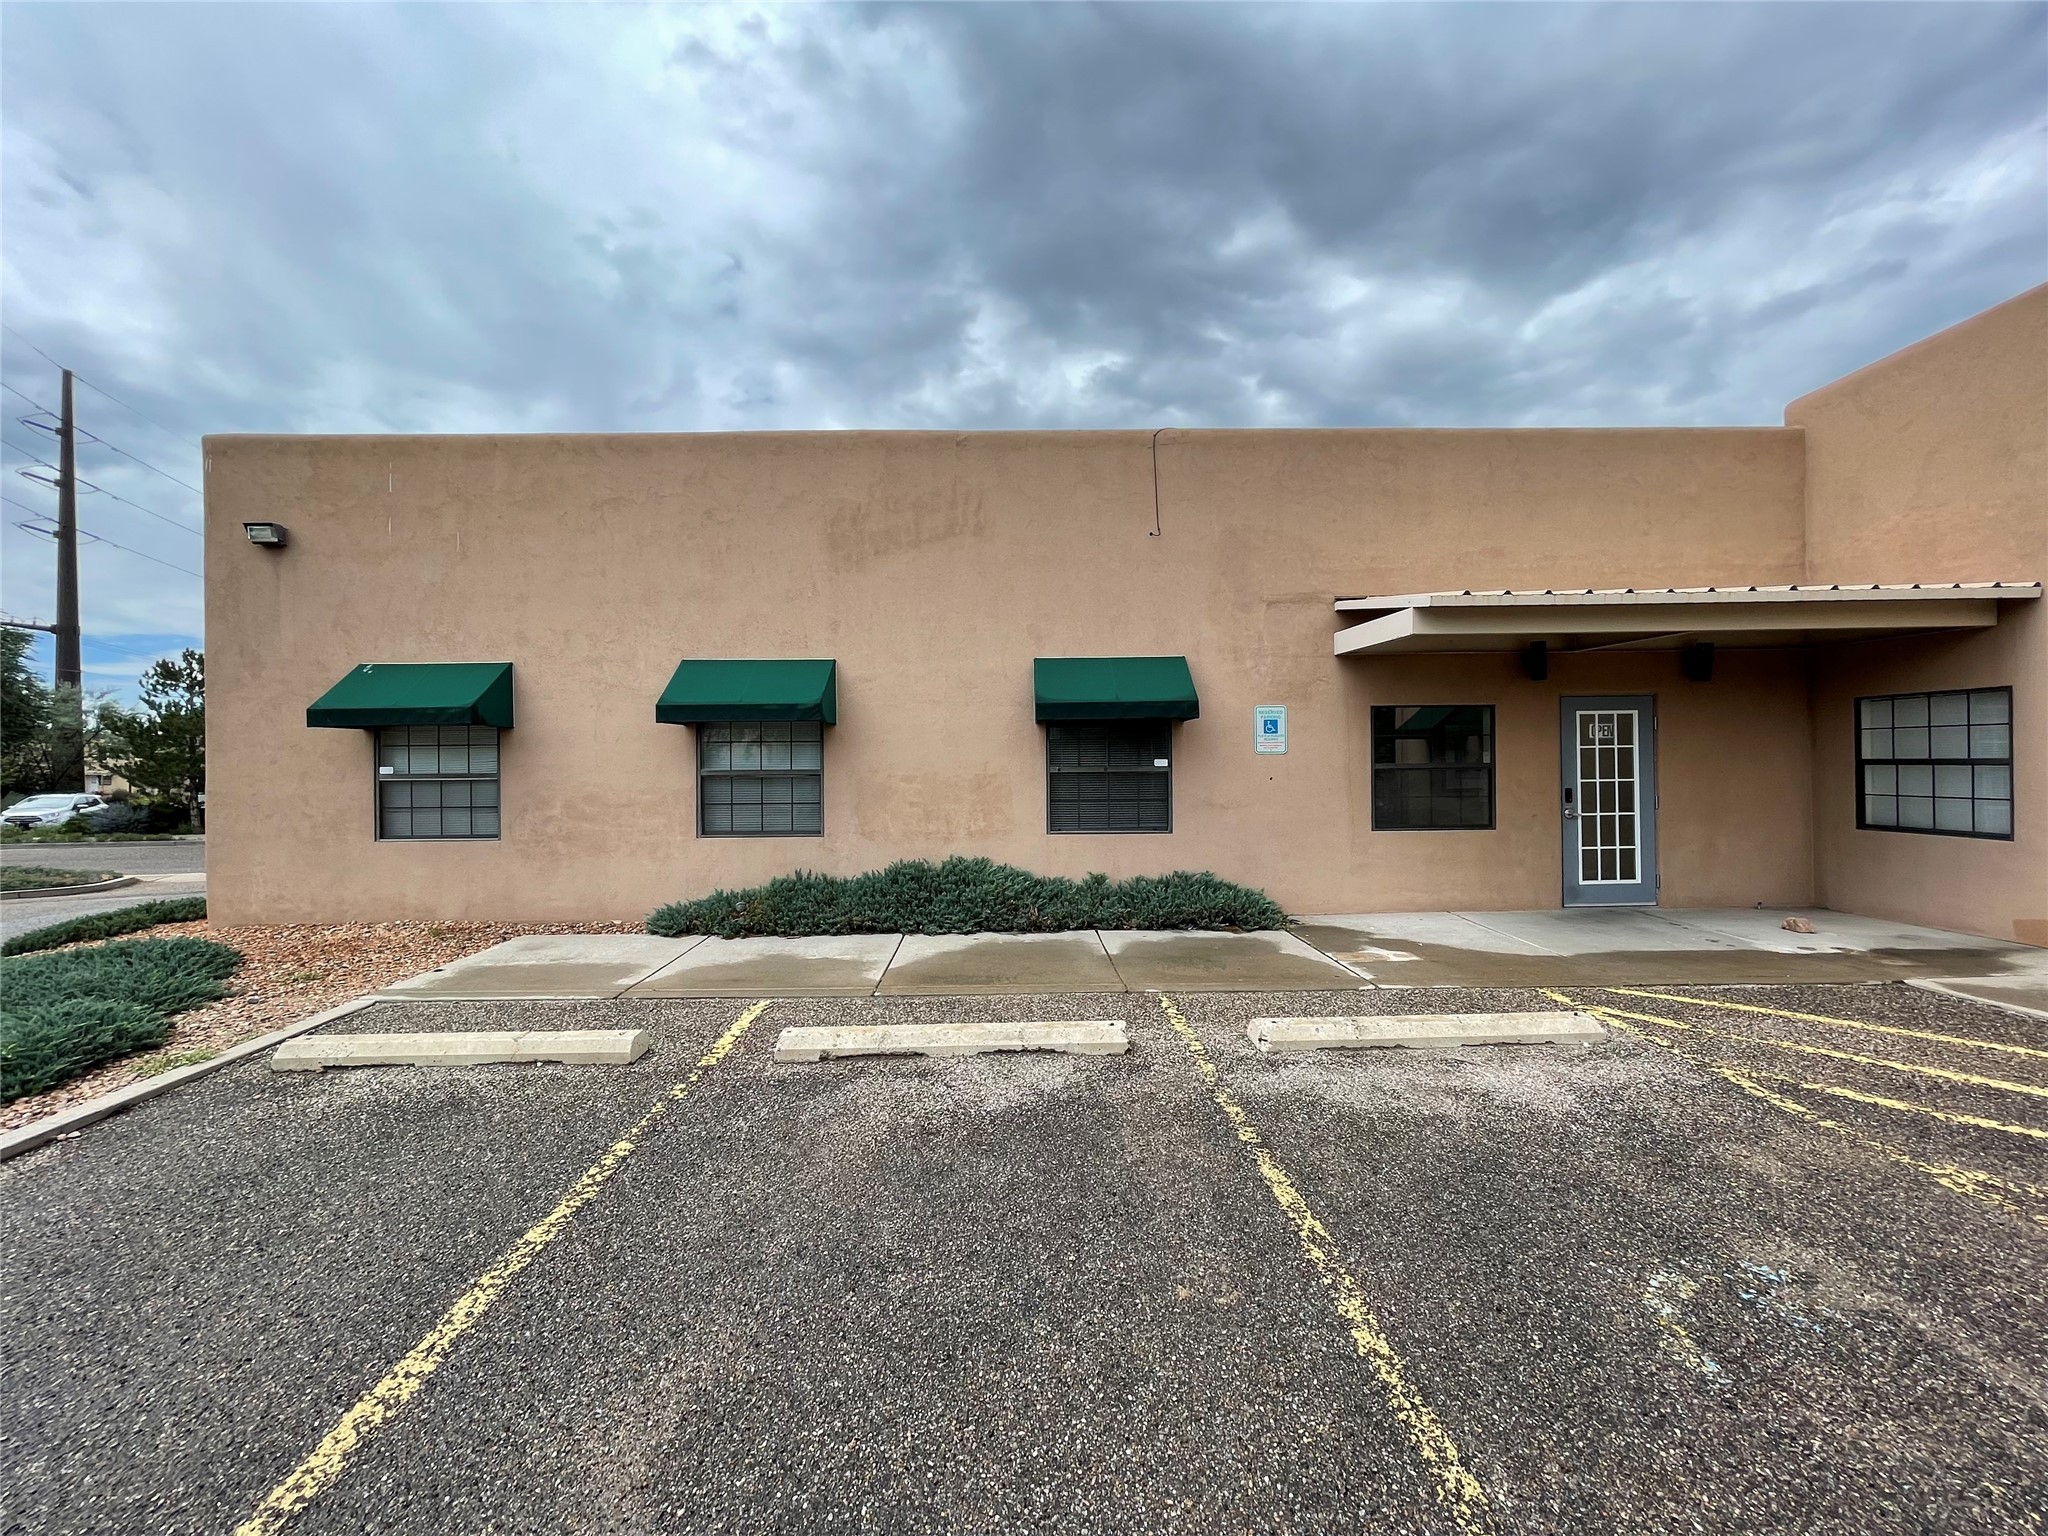 1225 Parkway Unit B, Santa Fe, New Mexico 87507, ,Commercial Lease,For Rent,1225 Parkway Unit B,202232817